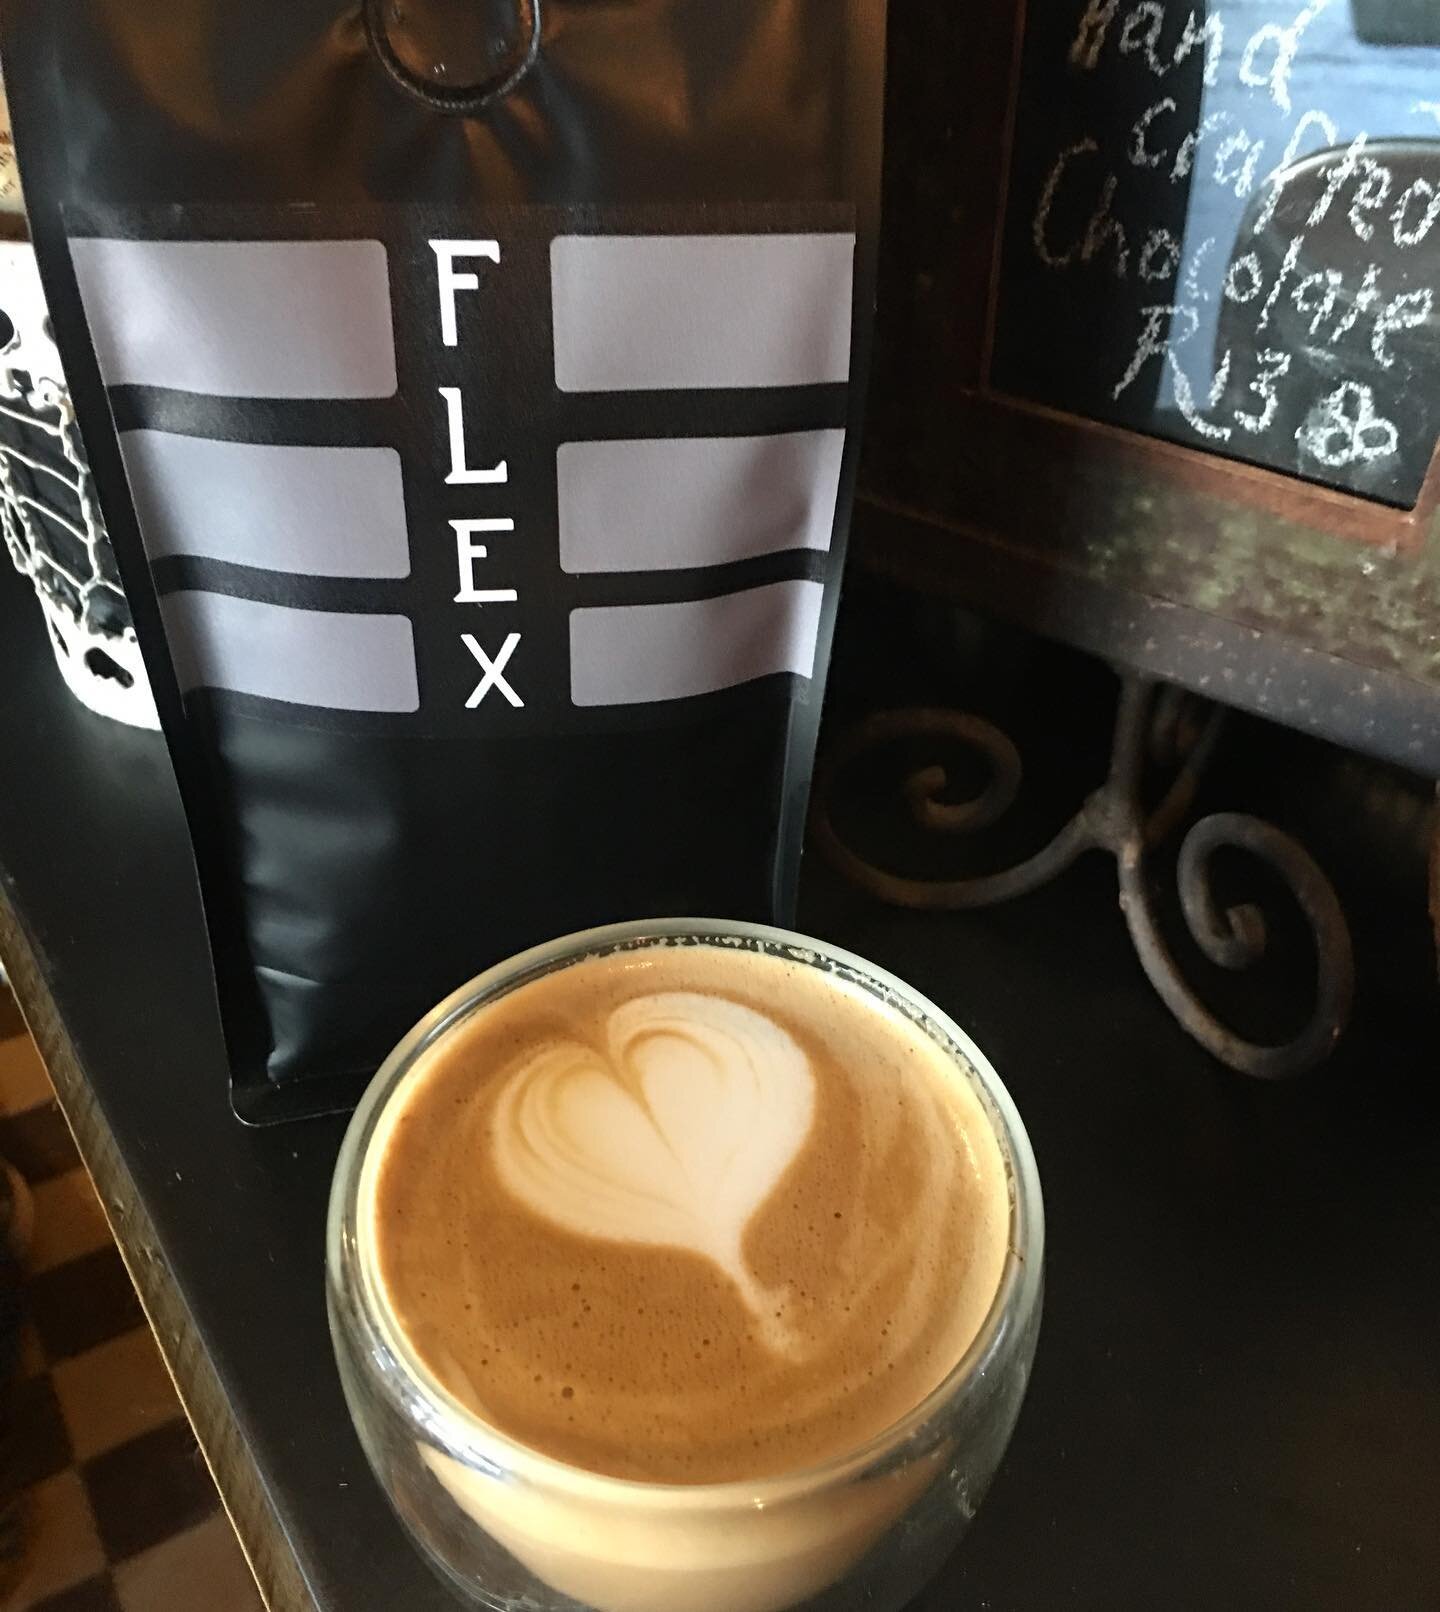 Joe is in the house today and serving up his FLEX focus coffee for you to taste. Bags of beans and ground available. #flex #focus #coffee